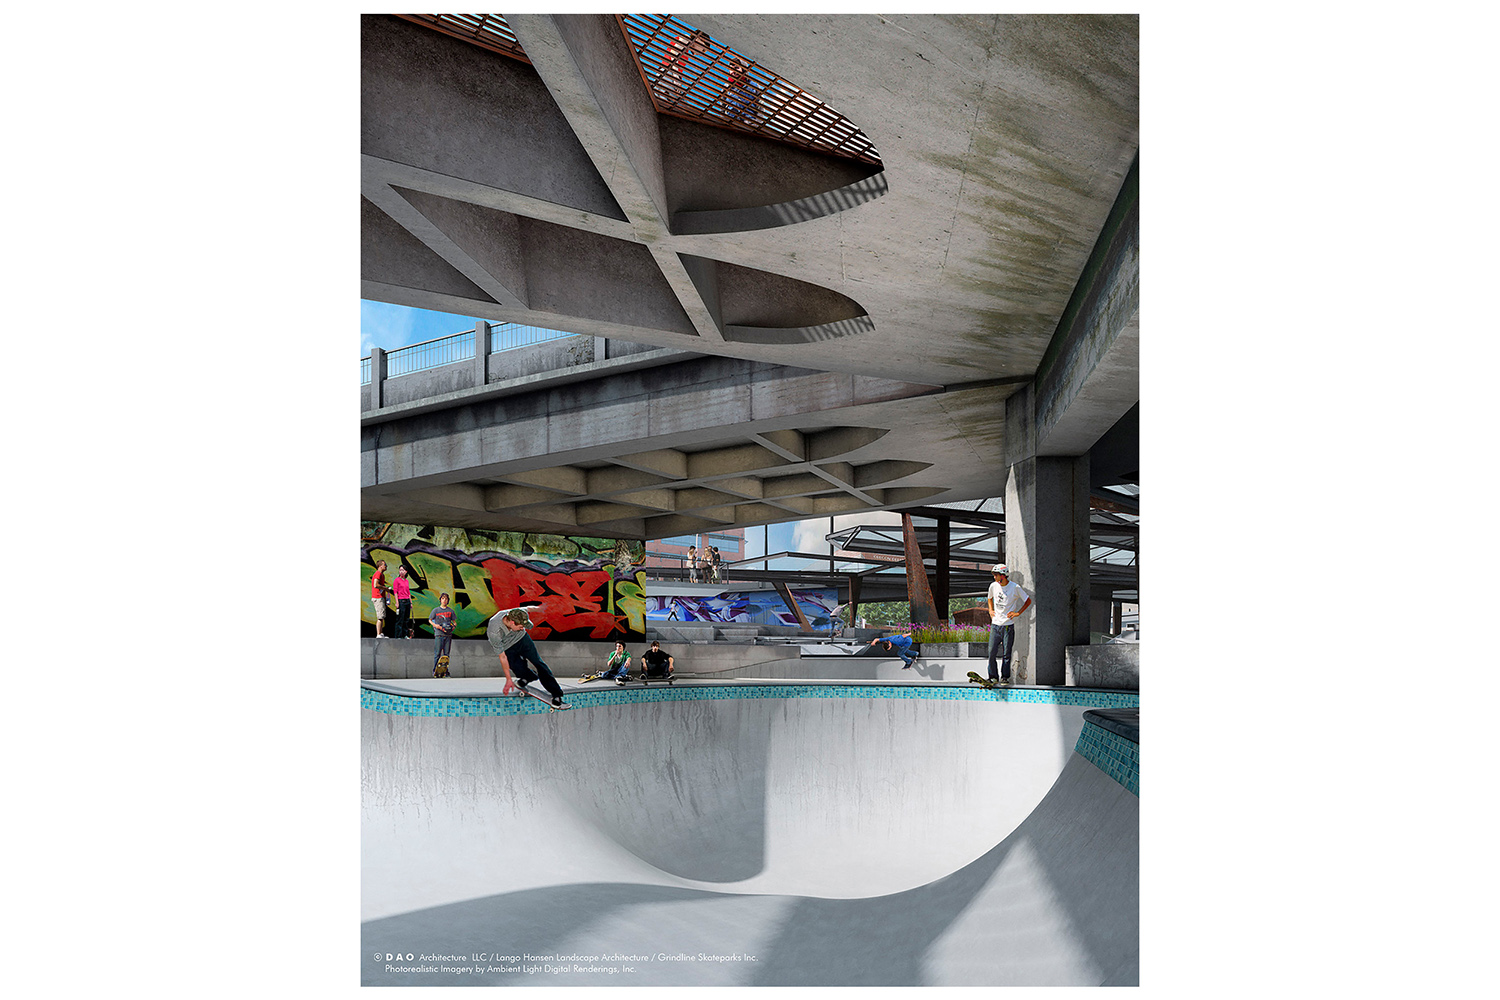  An early rendering showing a bowl section of the 30,000 square foot ODOT Steel Bridge Skatepark project. 